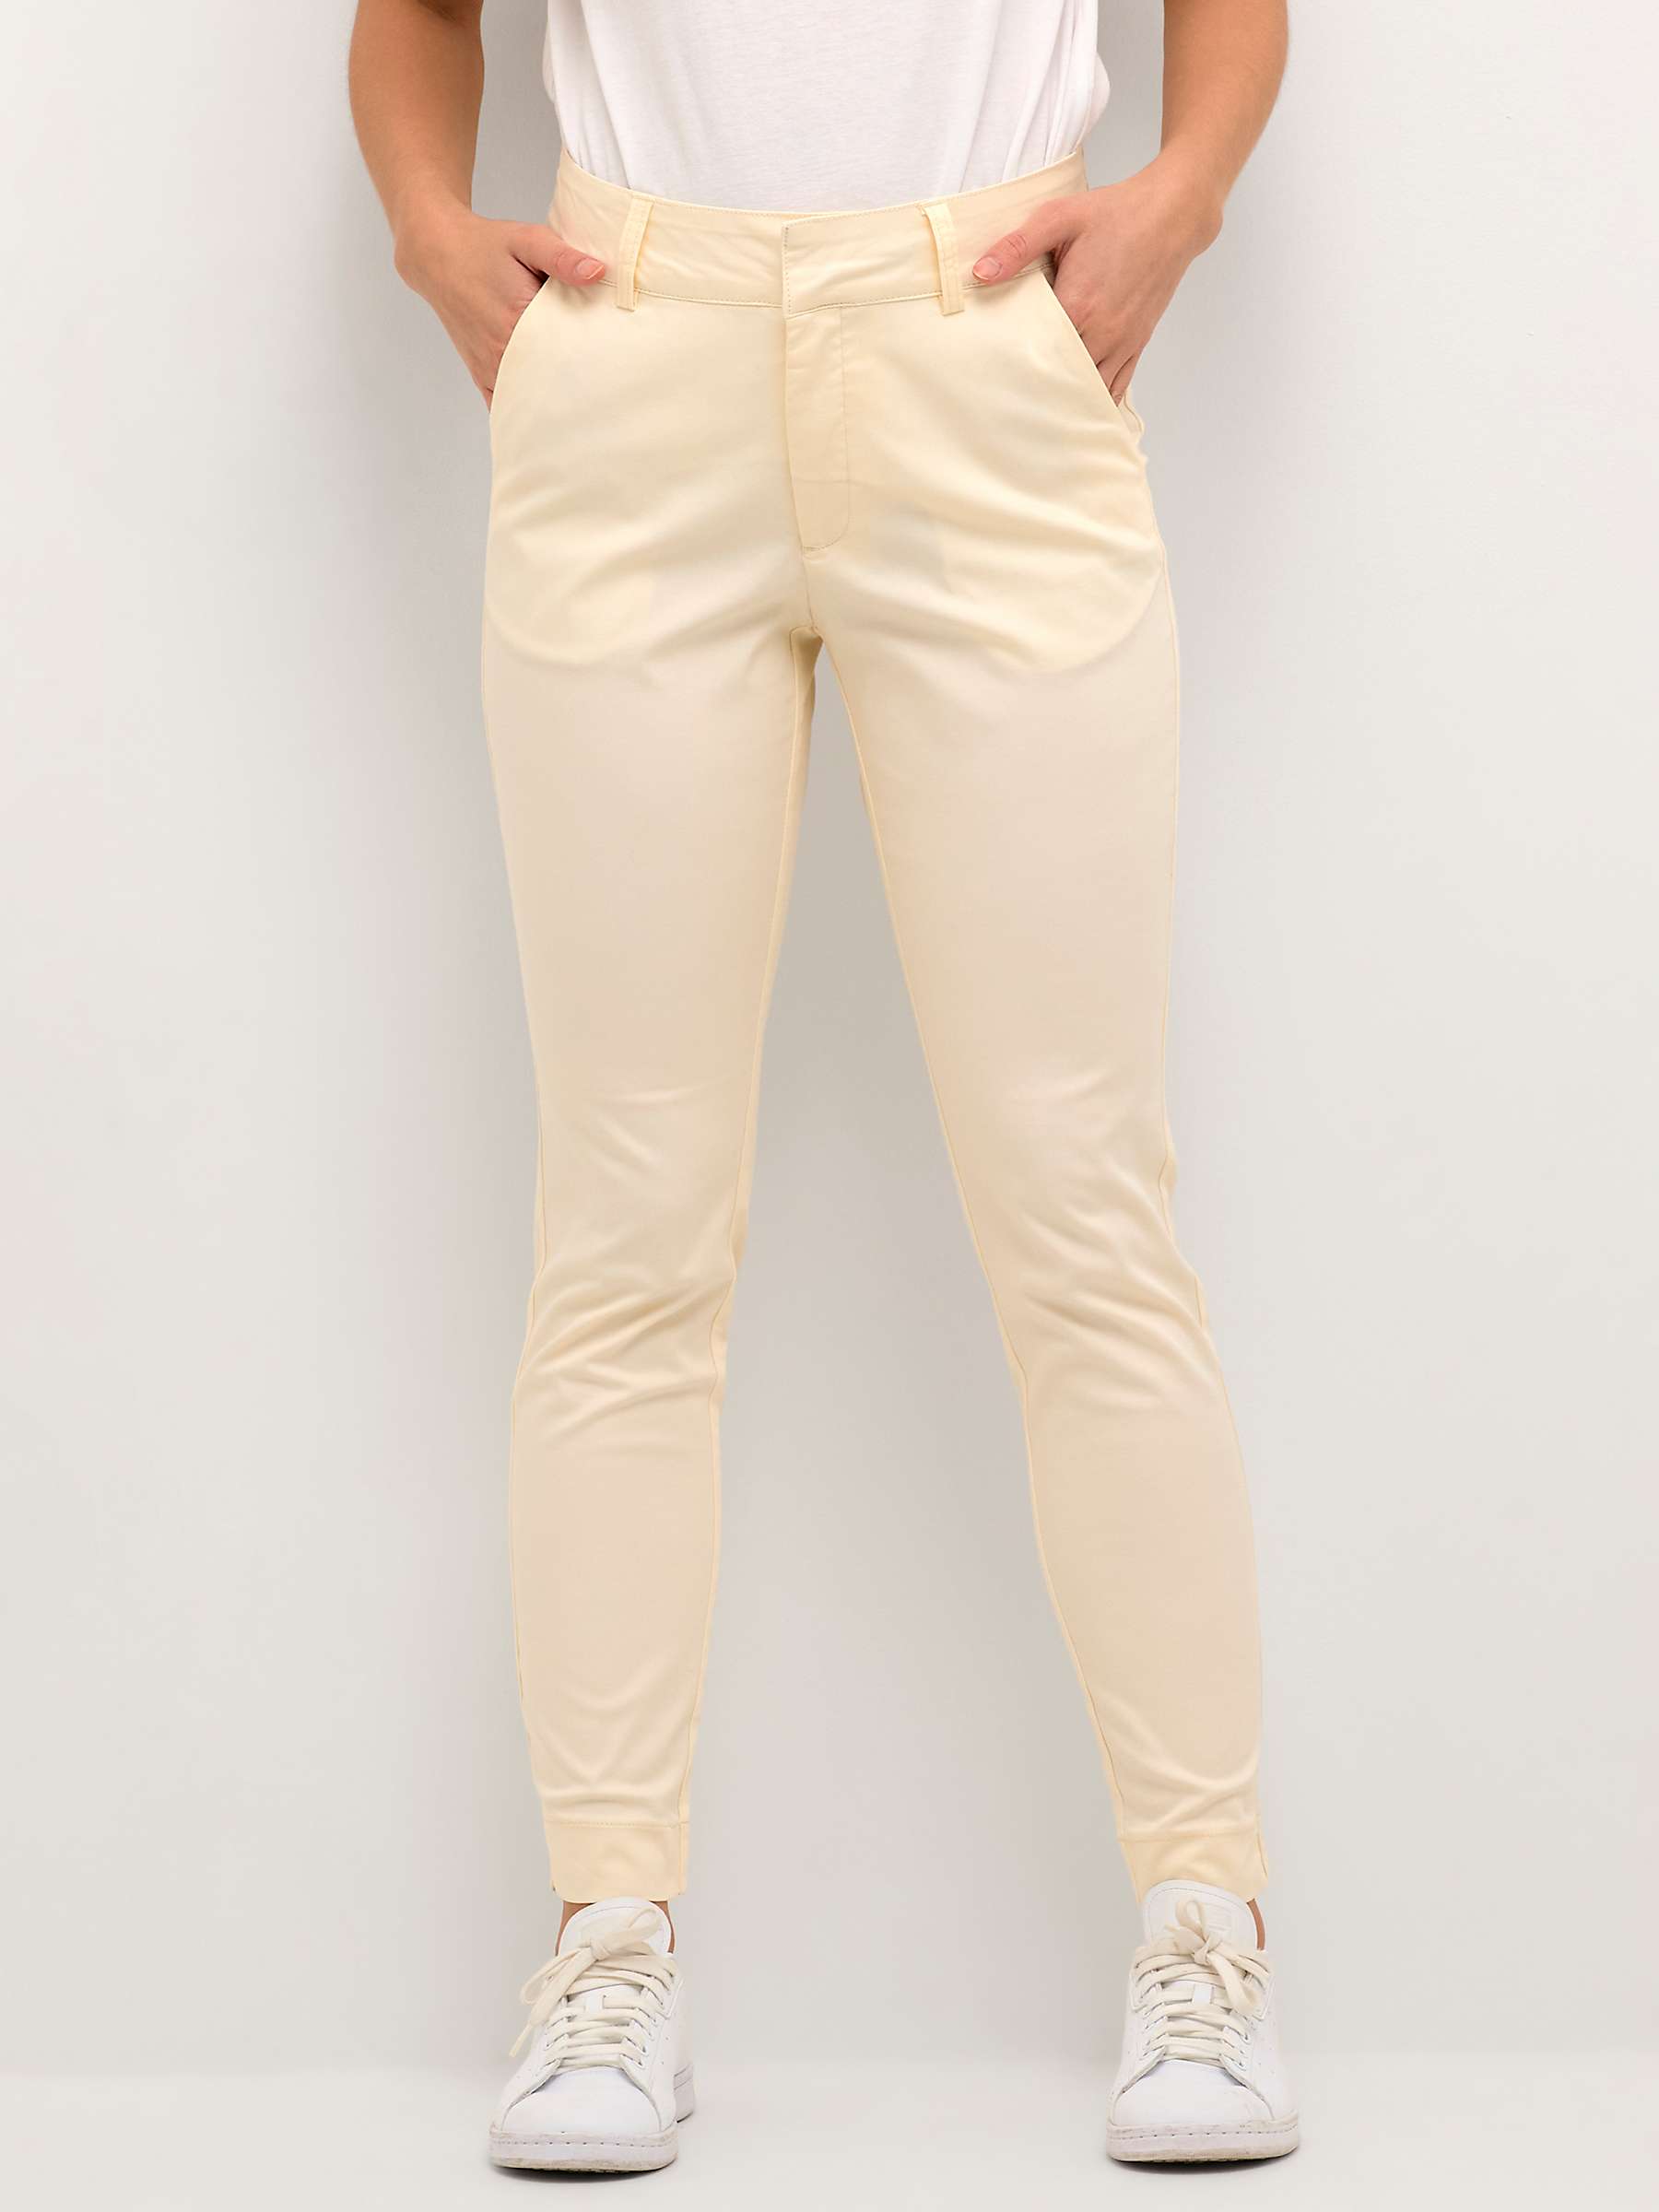 Buy KAFFE Lea Chino Trousers Online at johnlewis.com